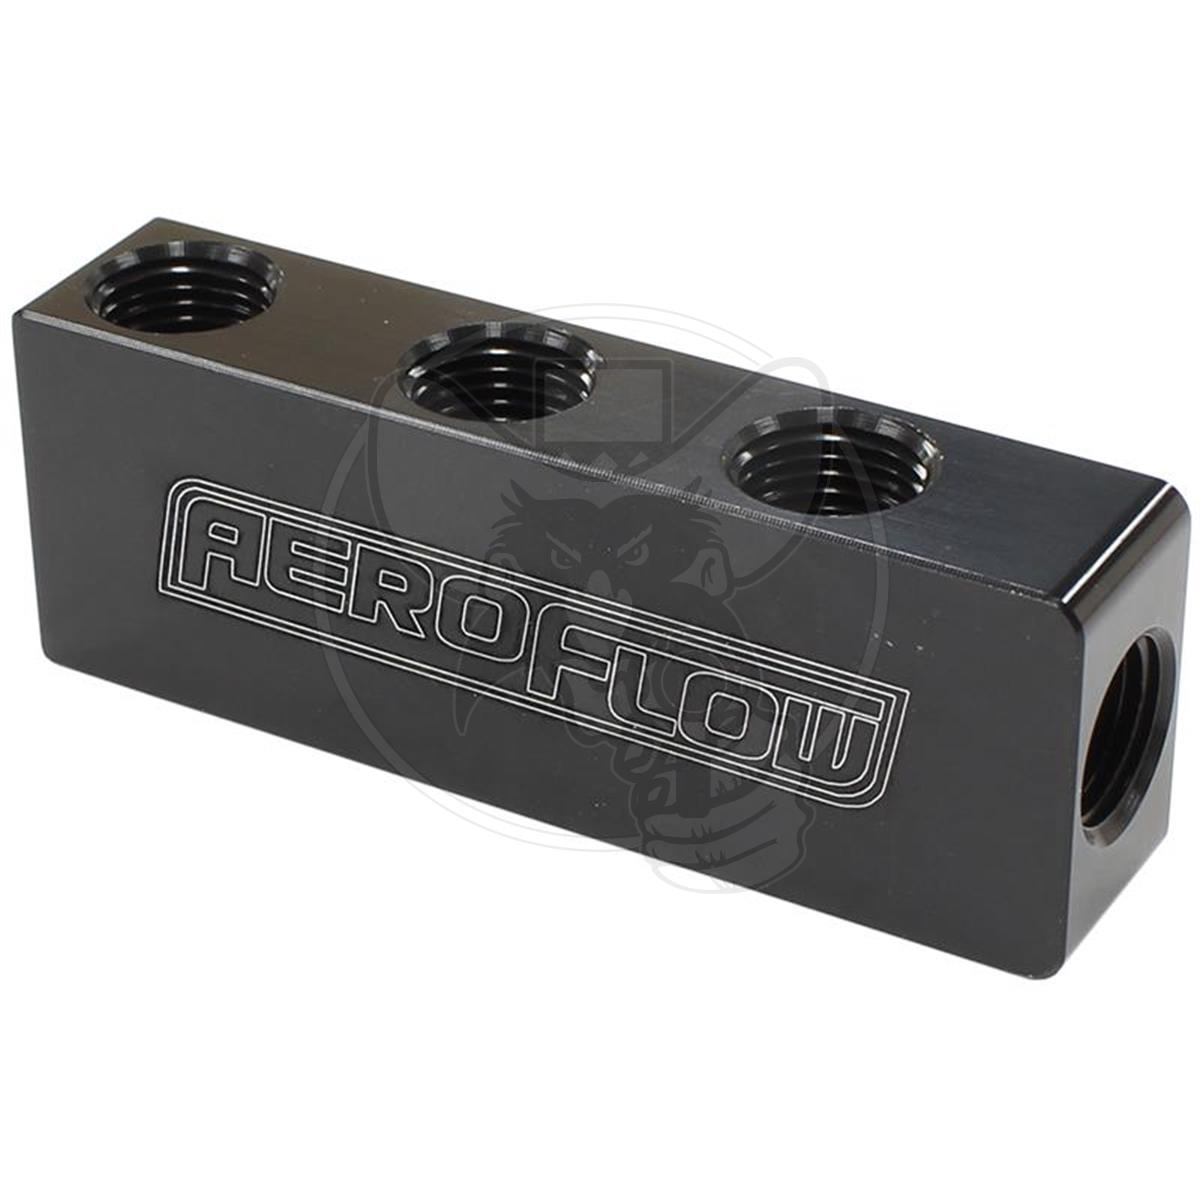 AEROFLOW DISTRIBUTION BLOCK 1 IN 6 OUT - ALL PORTS 1/8" NPT BLK